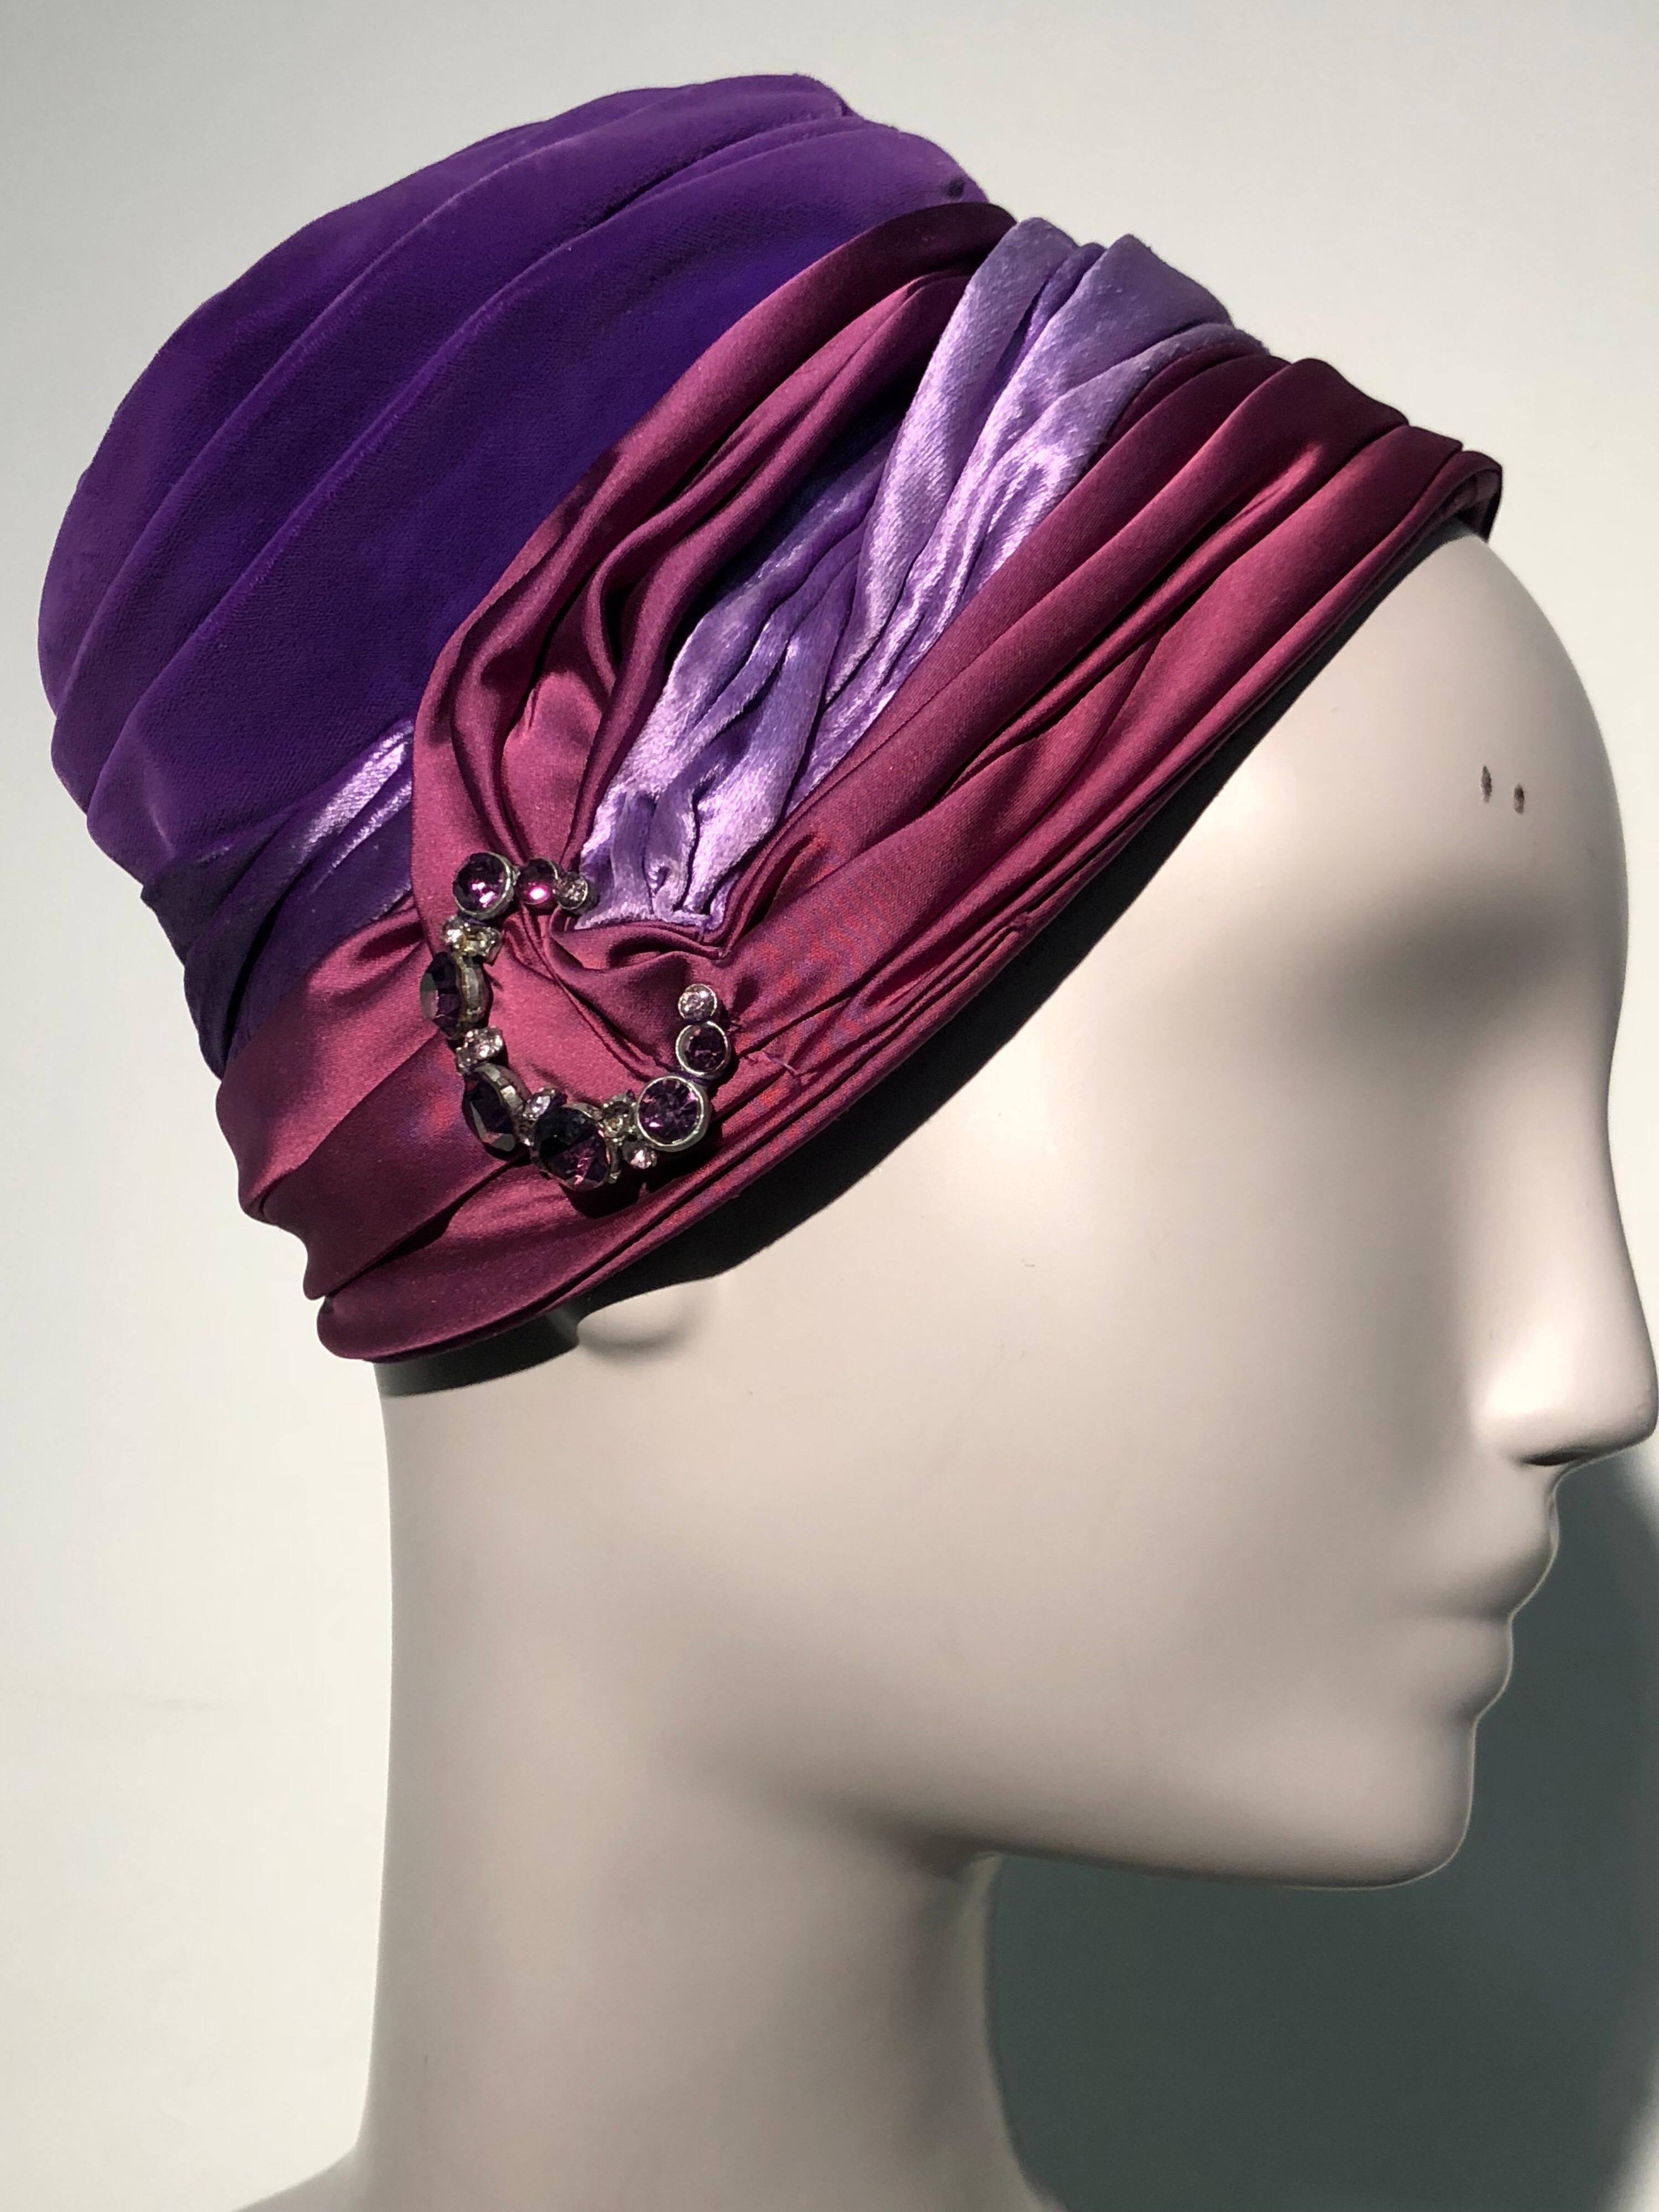 A gorgeous 1950s turban-styled hat in purple velvet, purple satin and burgundy satin with a rhinestone and pearl brooch at front. No maker label present. 